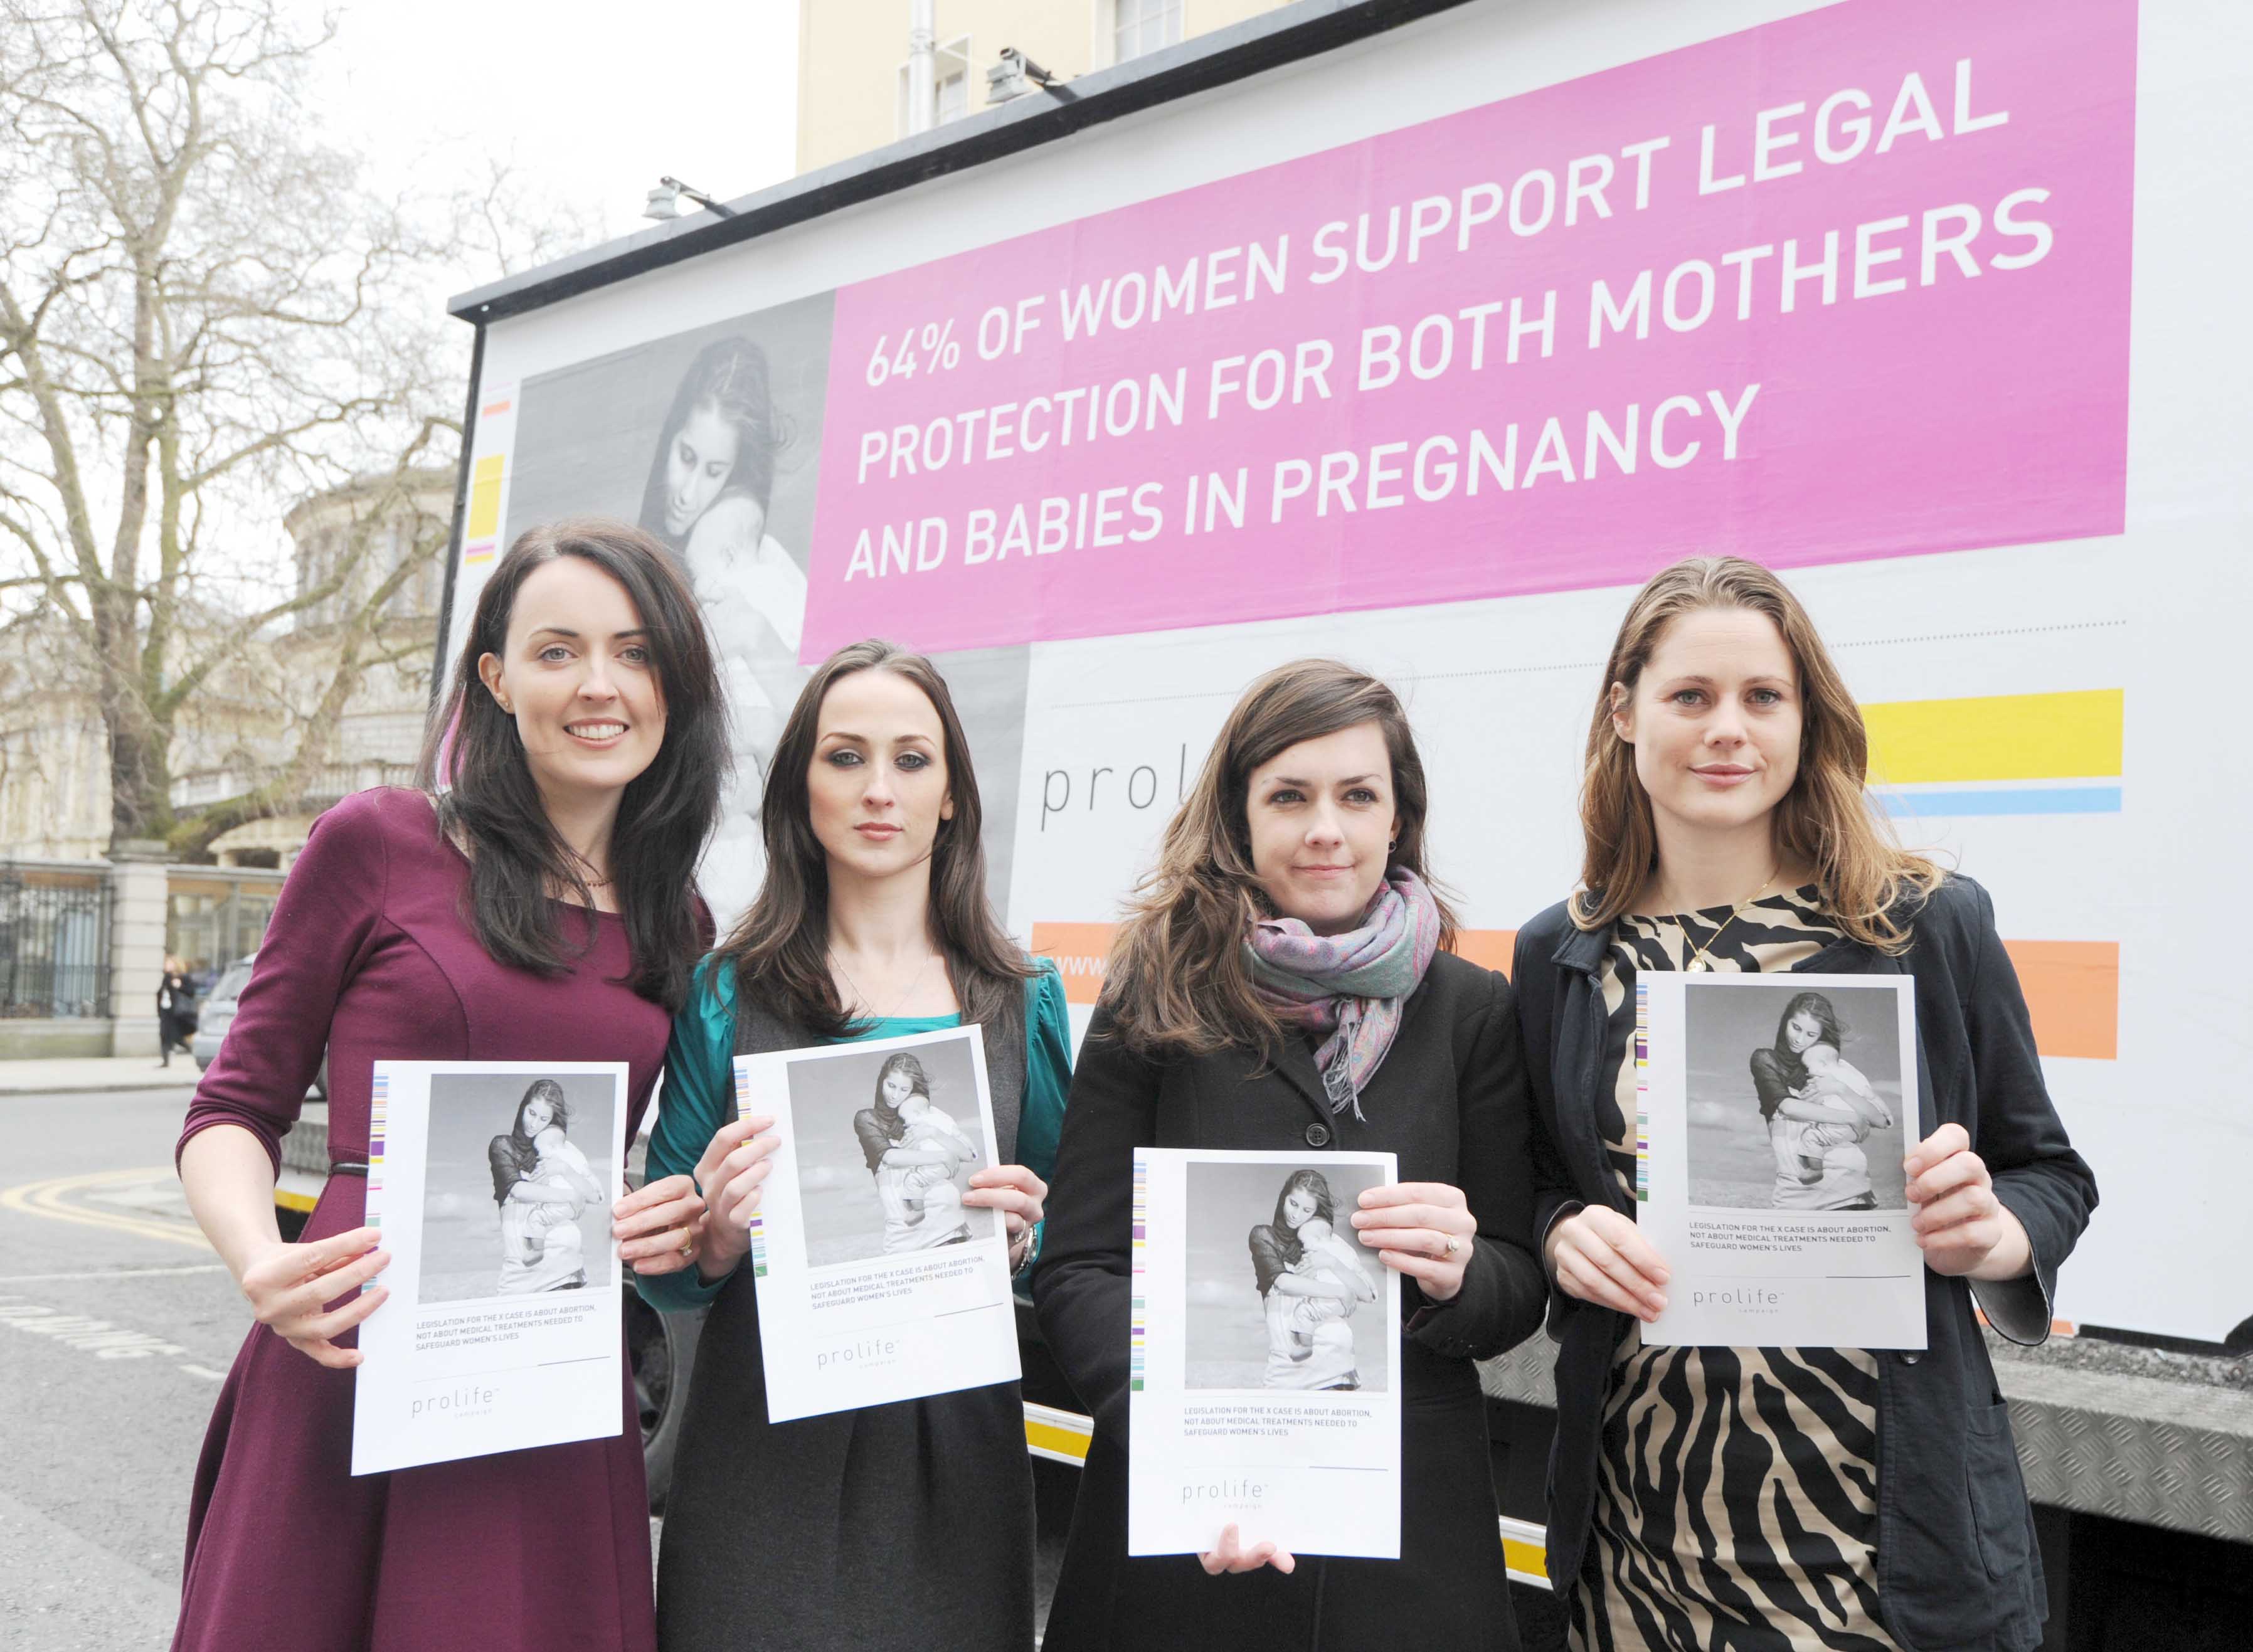 21.02.2013: Sizeable majority support legal protection of unborn – New research